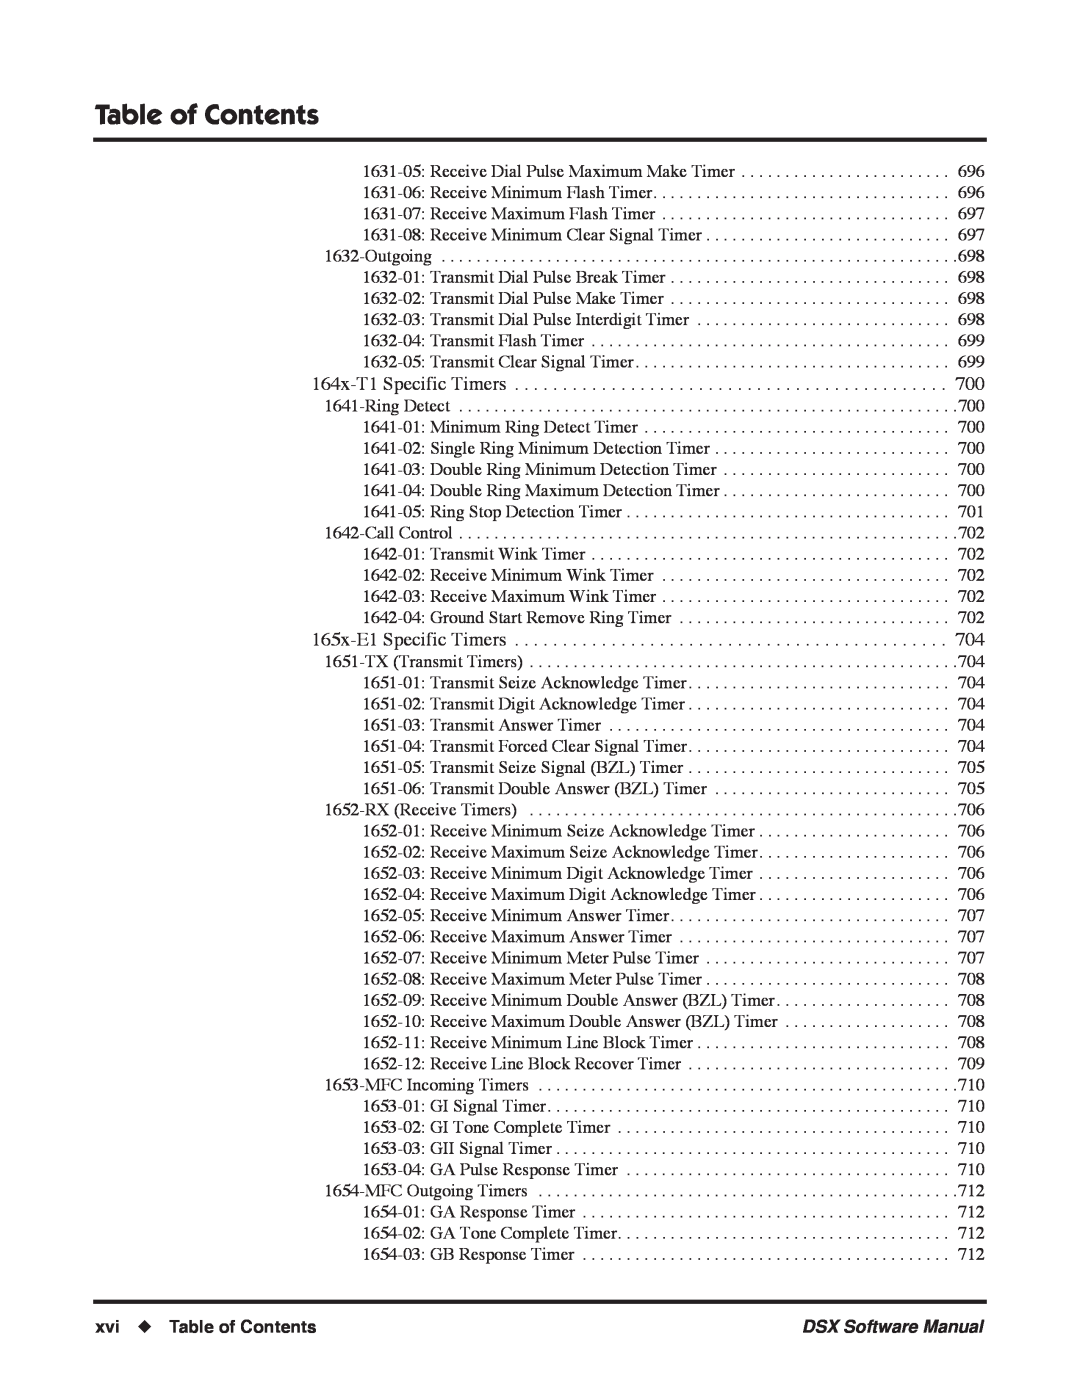 NEC N 1093100, P software manual xvi Table of Contents 